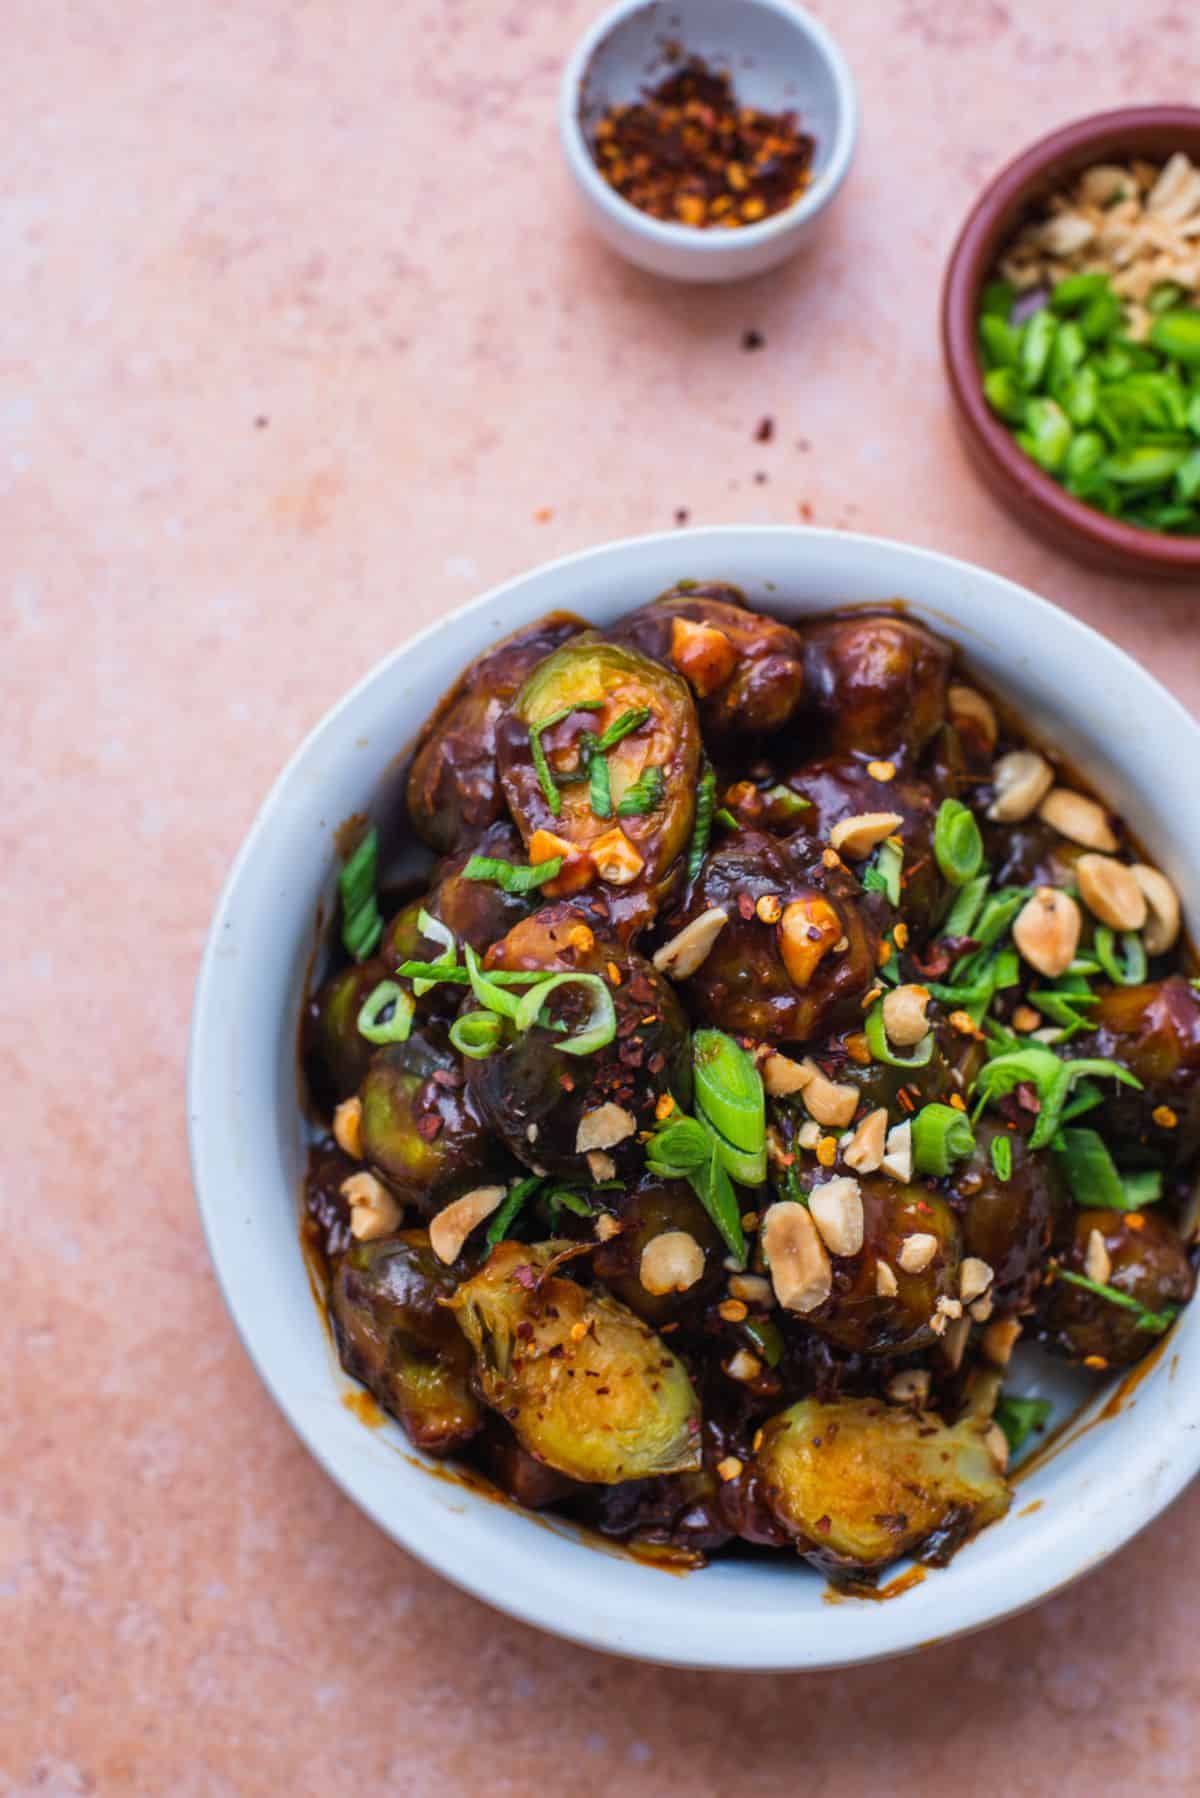 Kung pao brussel sprouts 2